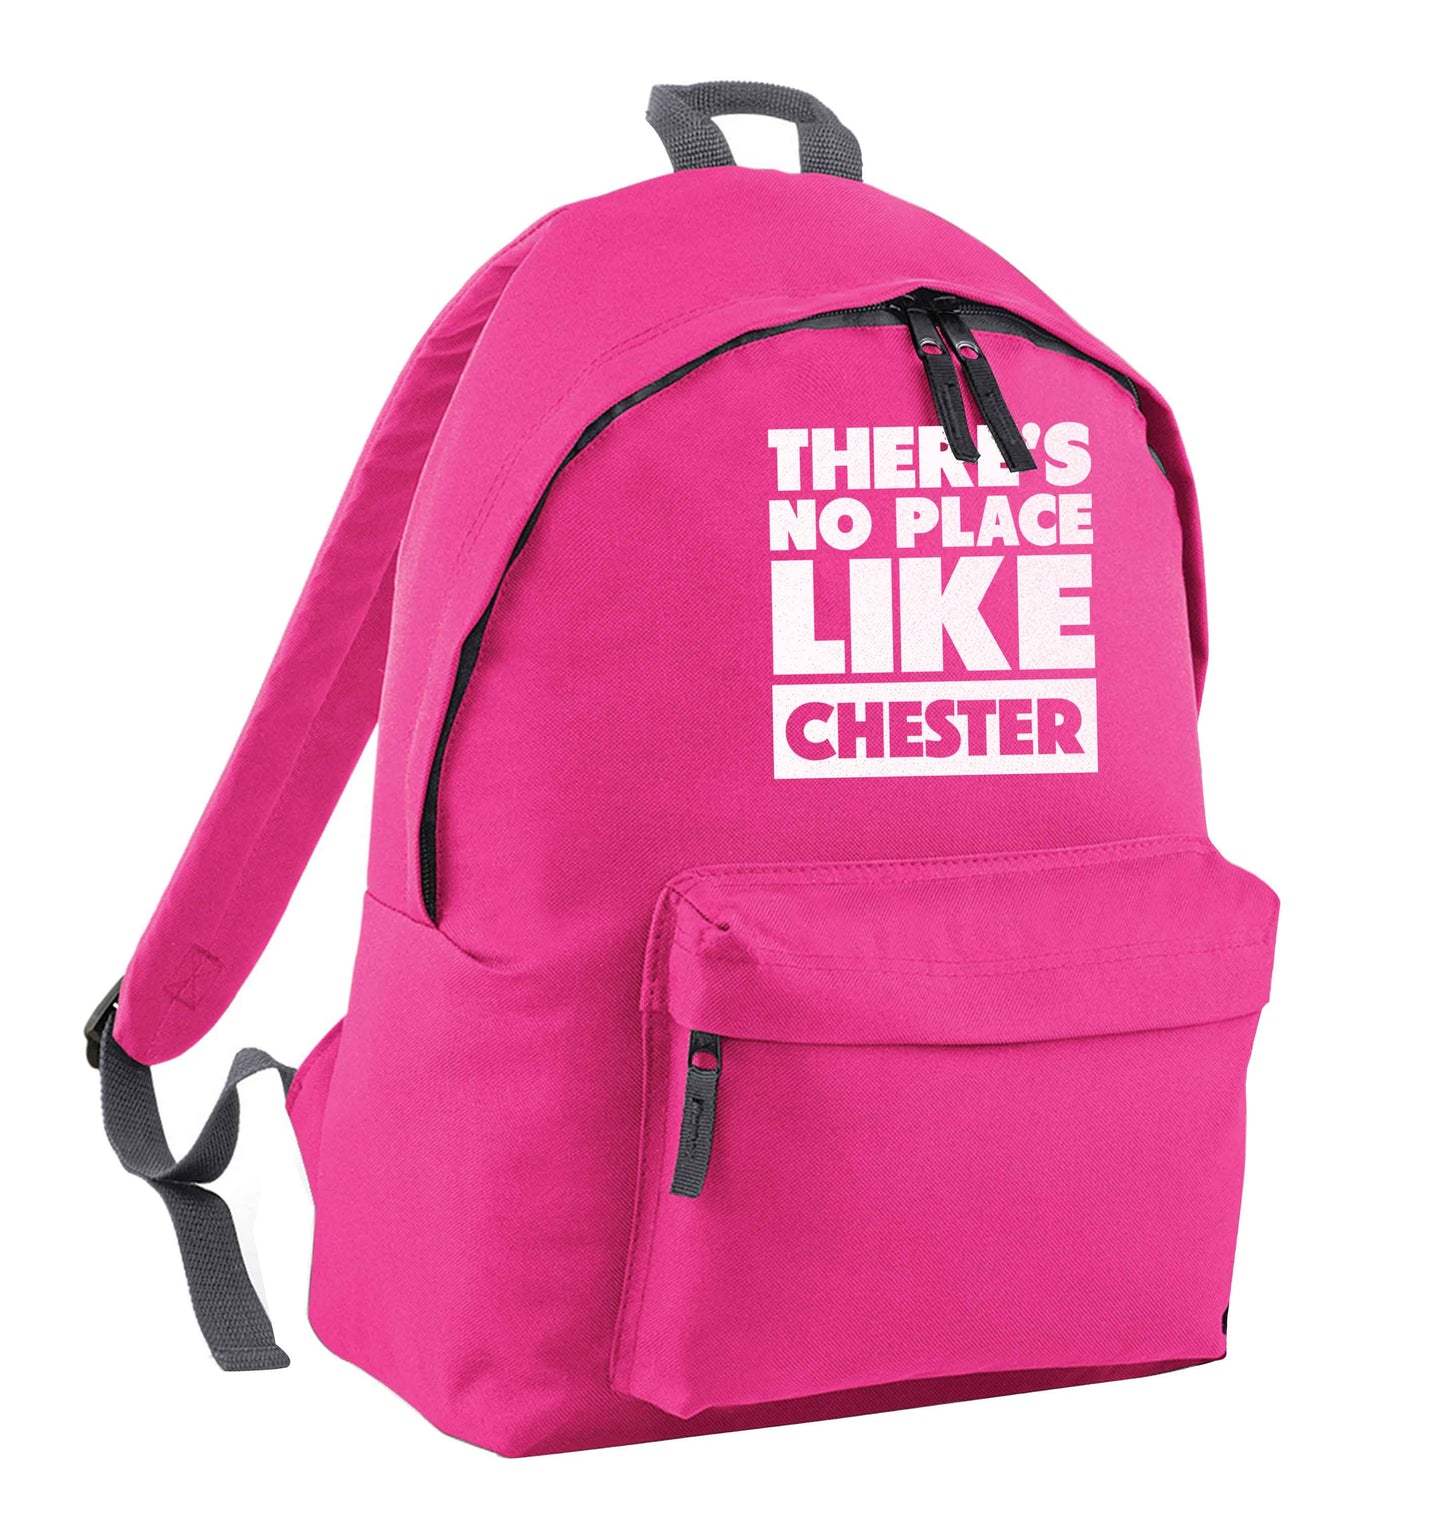 There's no place like Chester pink adults backpack